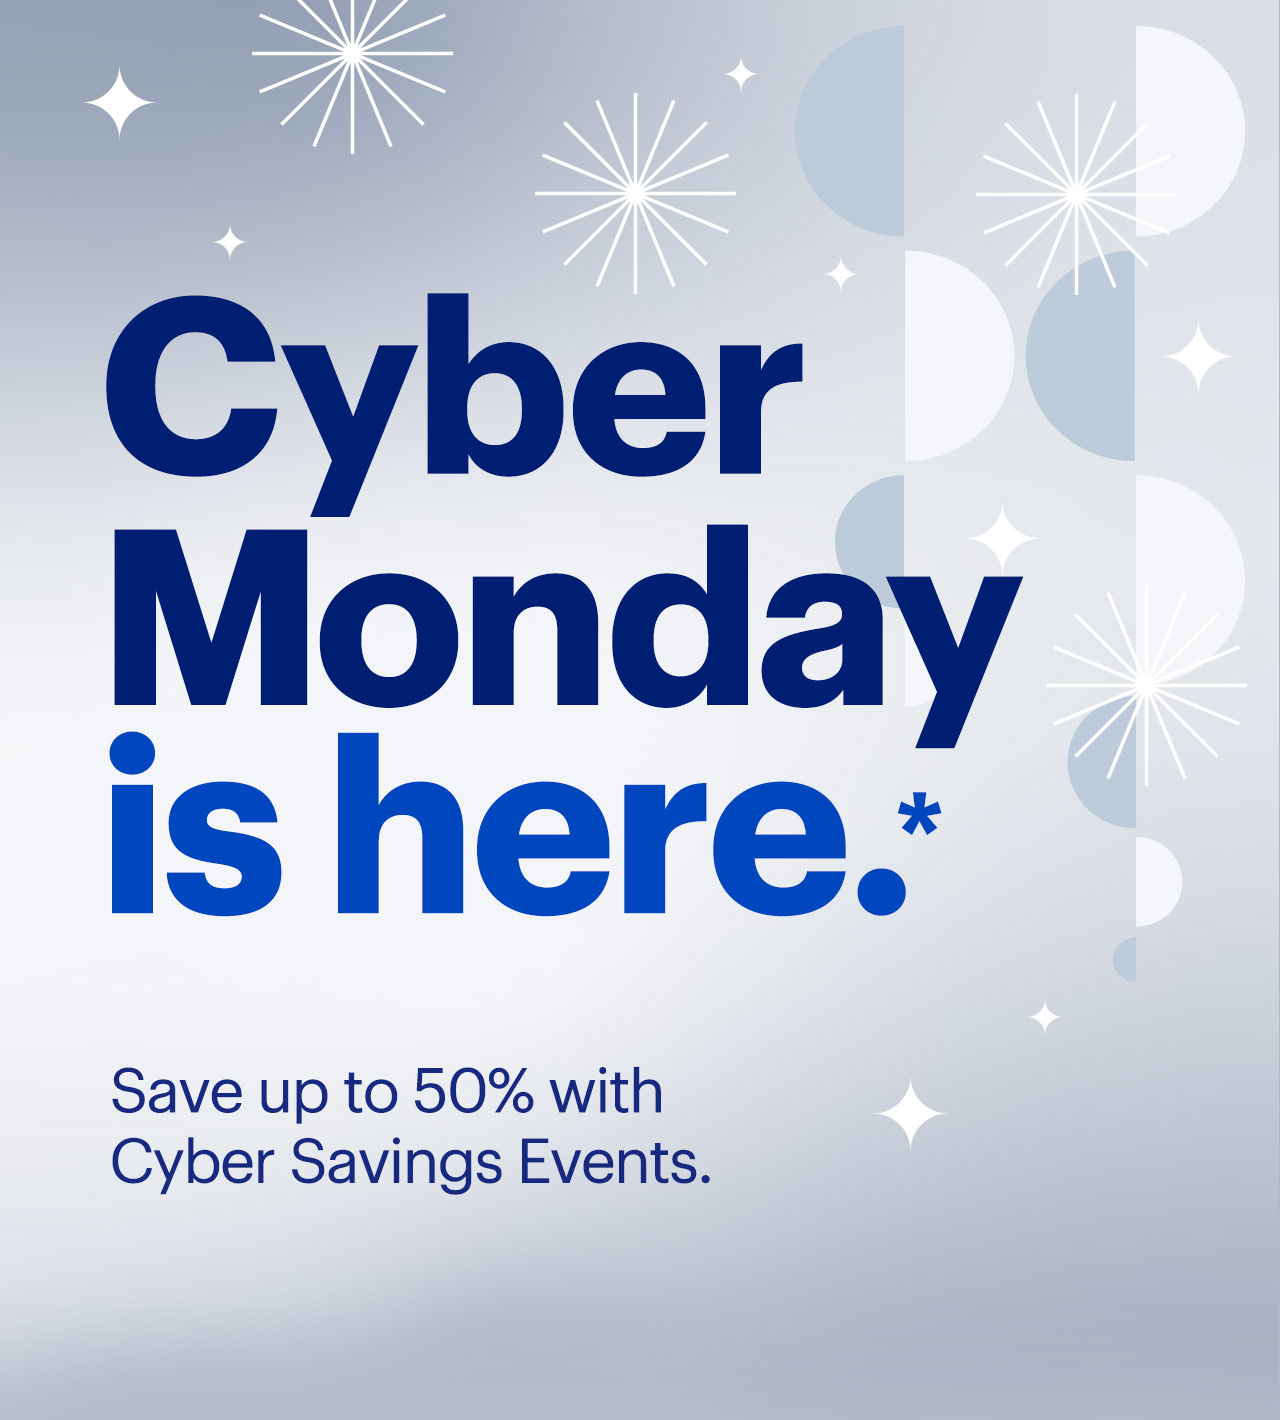 Cyber Monday is here. Save up to 50% with Cyber Savings Events. Reference disclaimer.